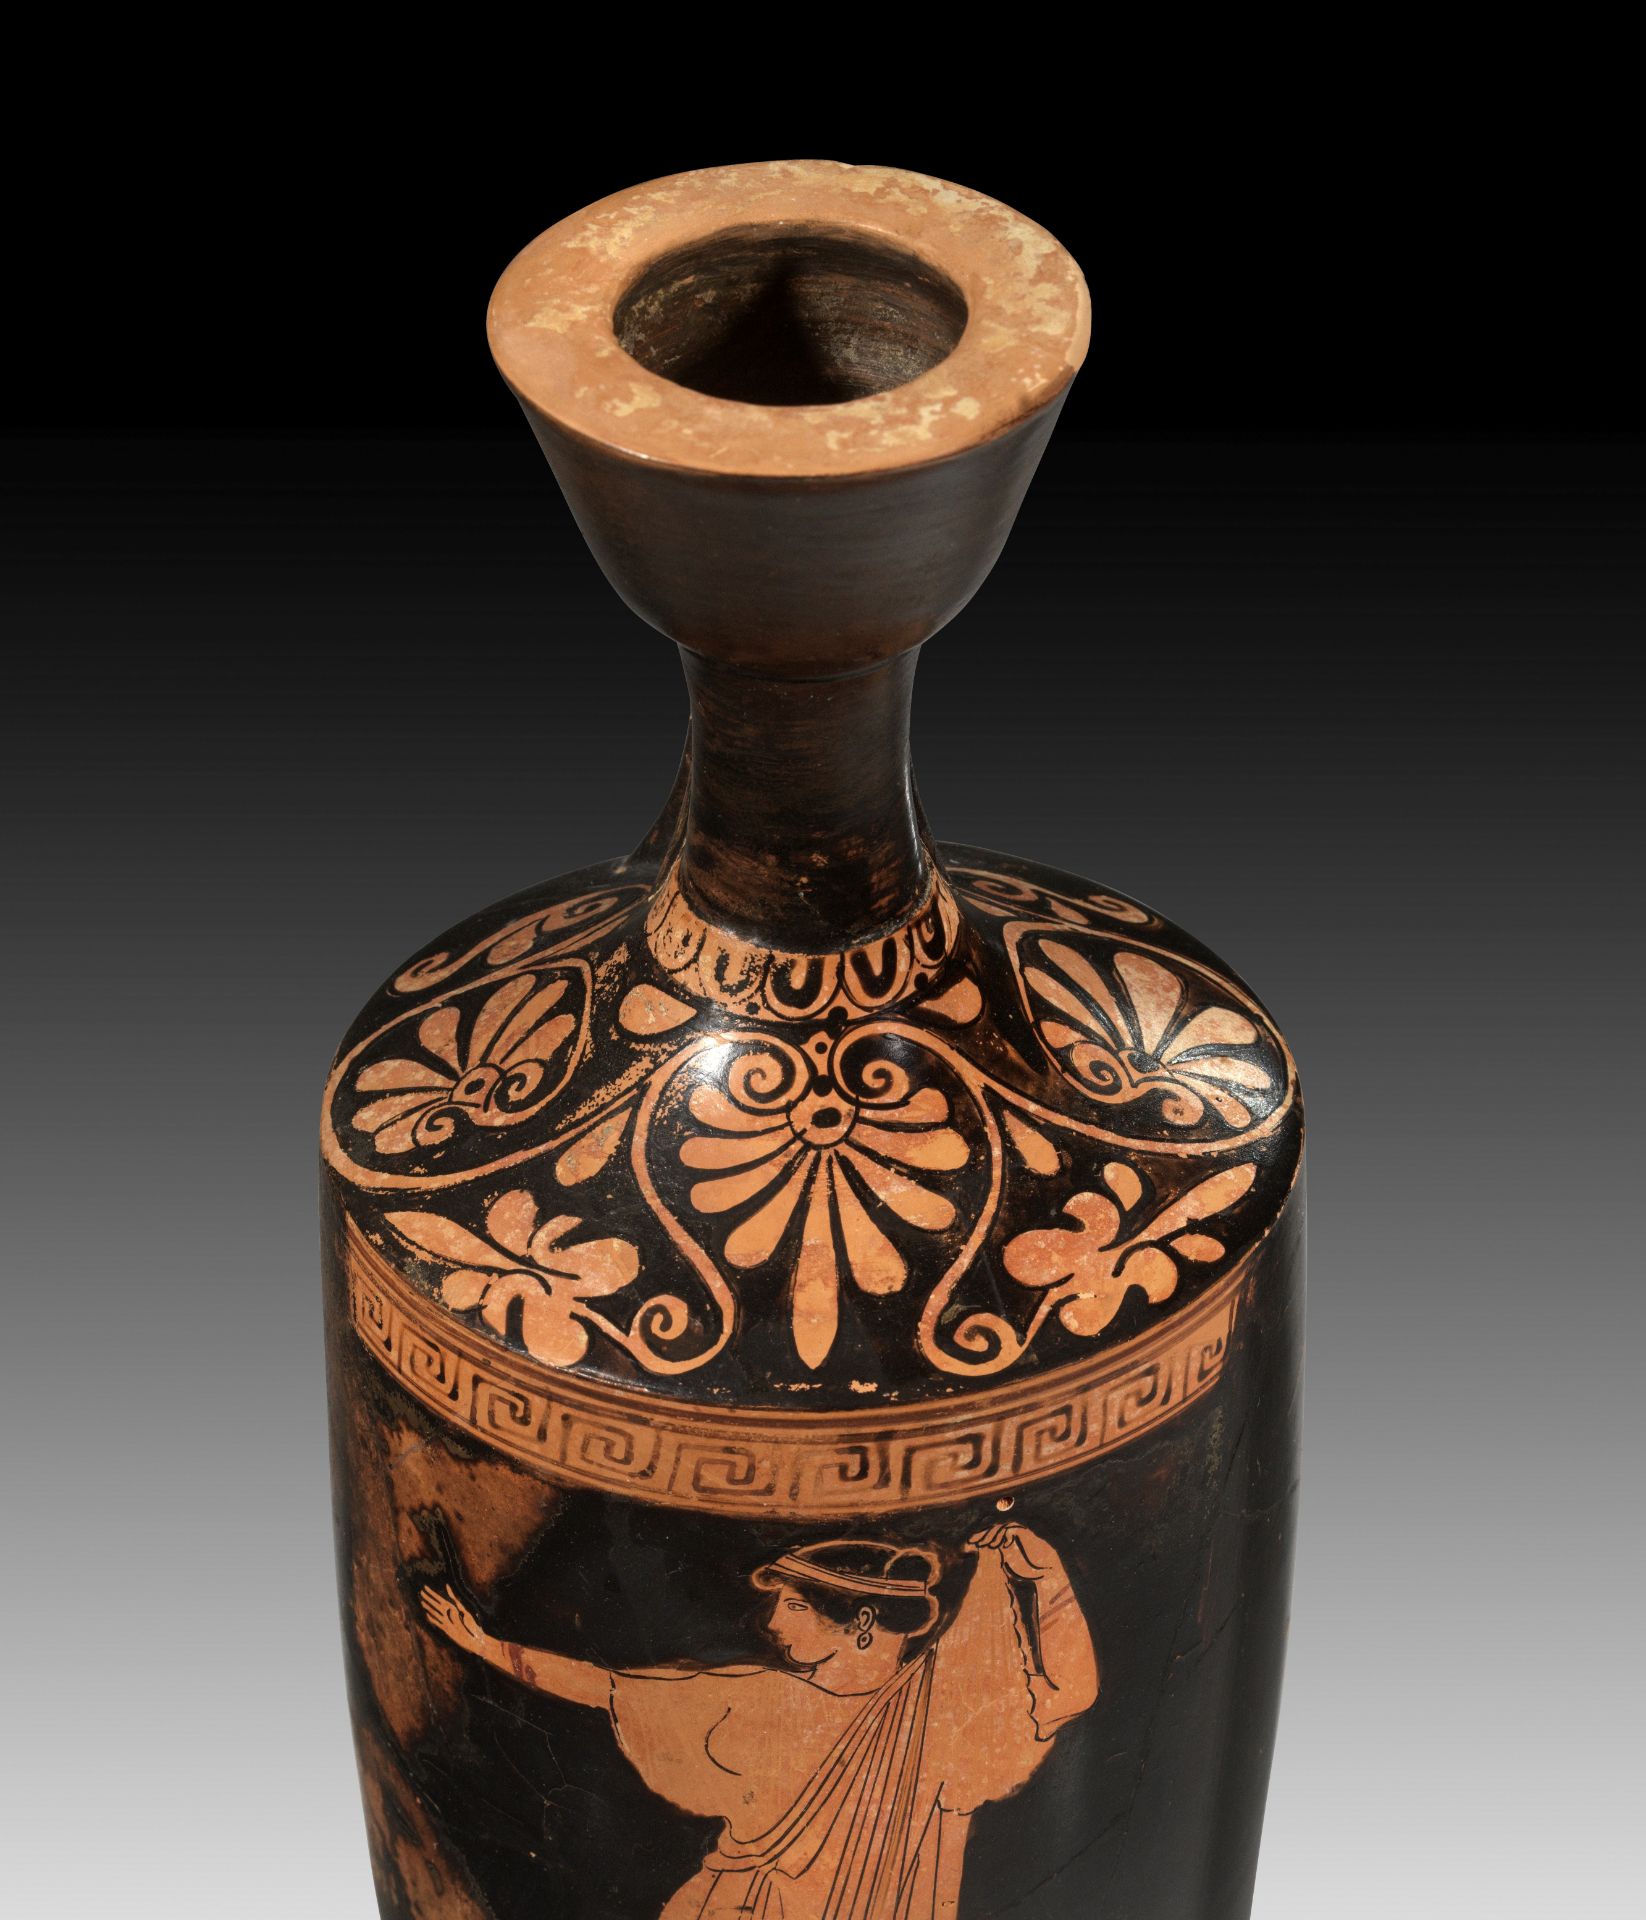 Large Attic red-figure cylindrical lekythos of the Providence Painter.